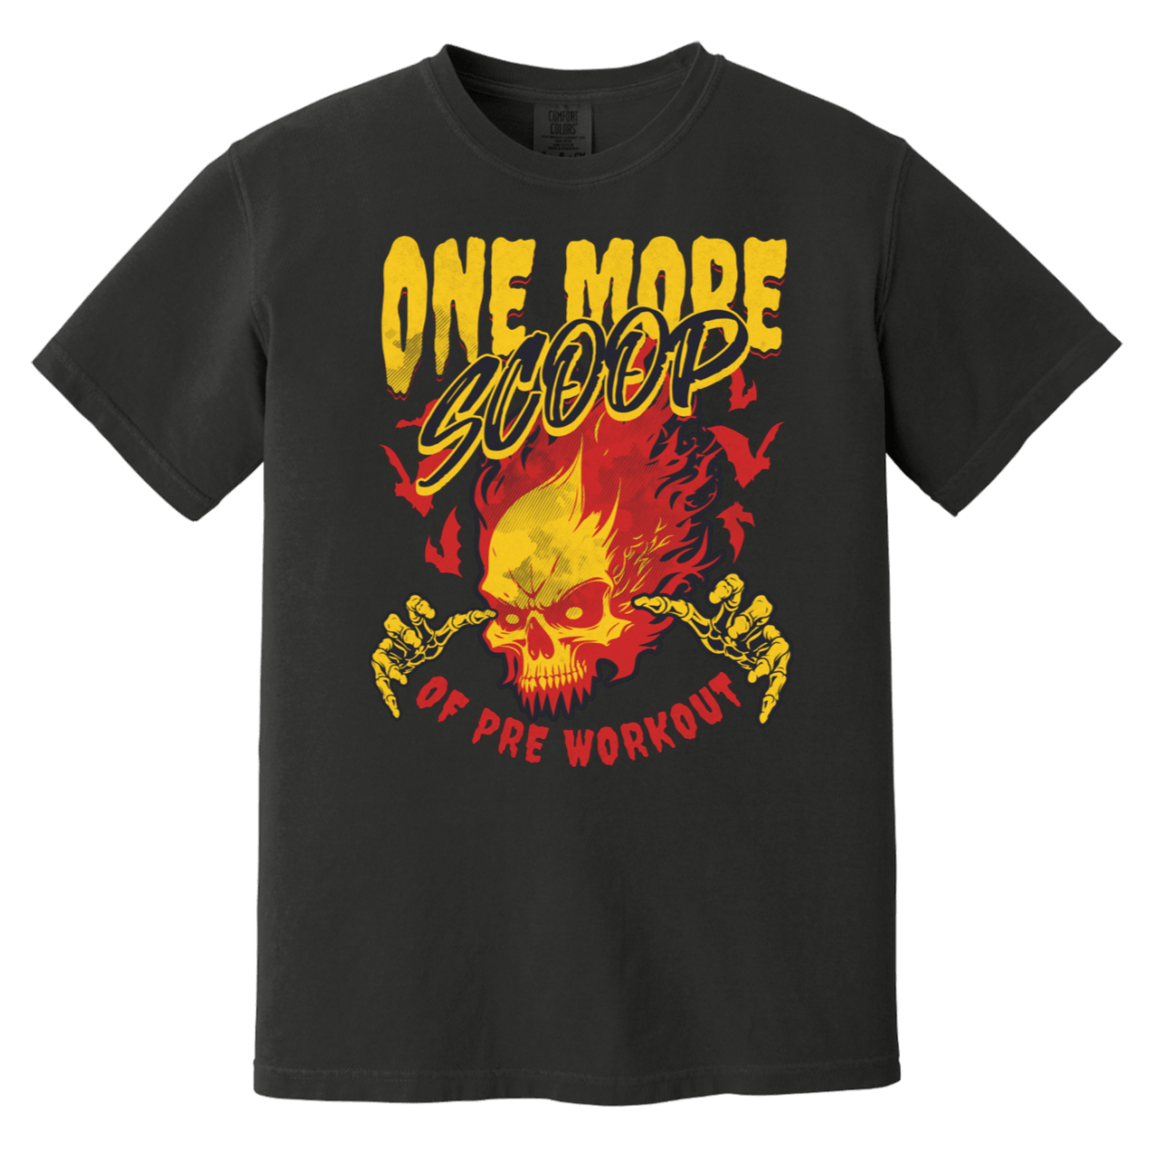 One More Scoop Streetwear T-shirt - T-Shirts